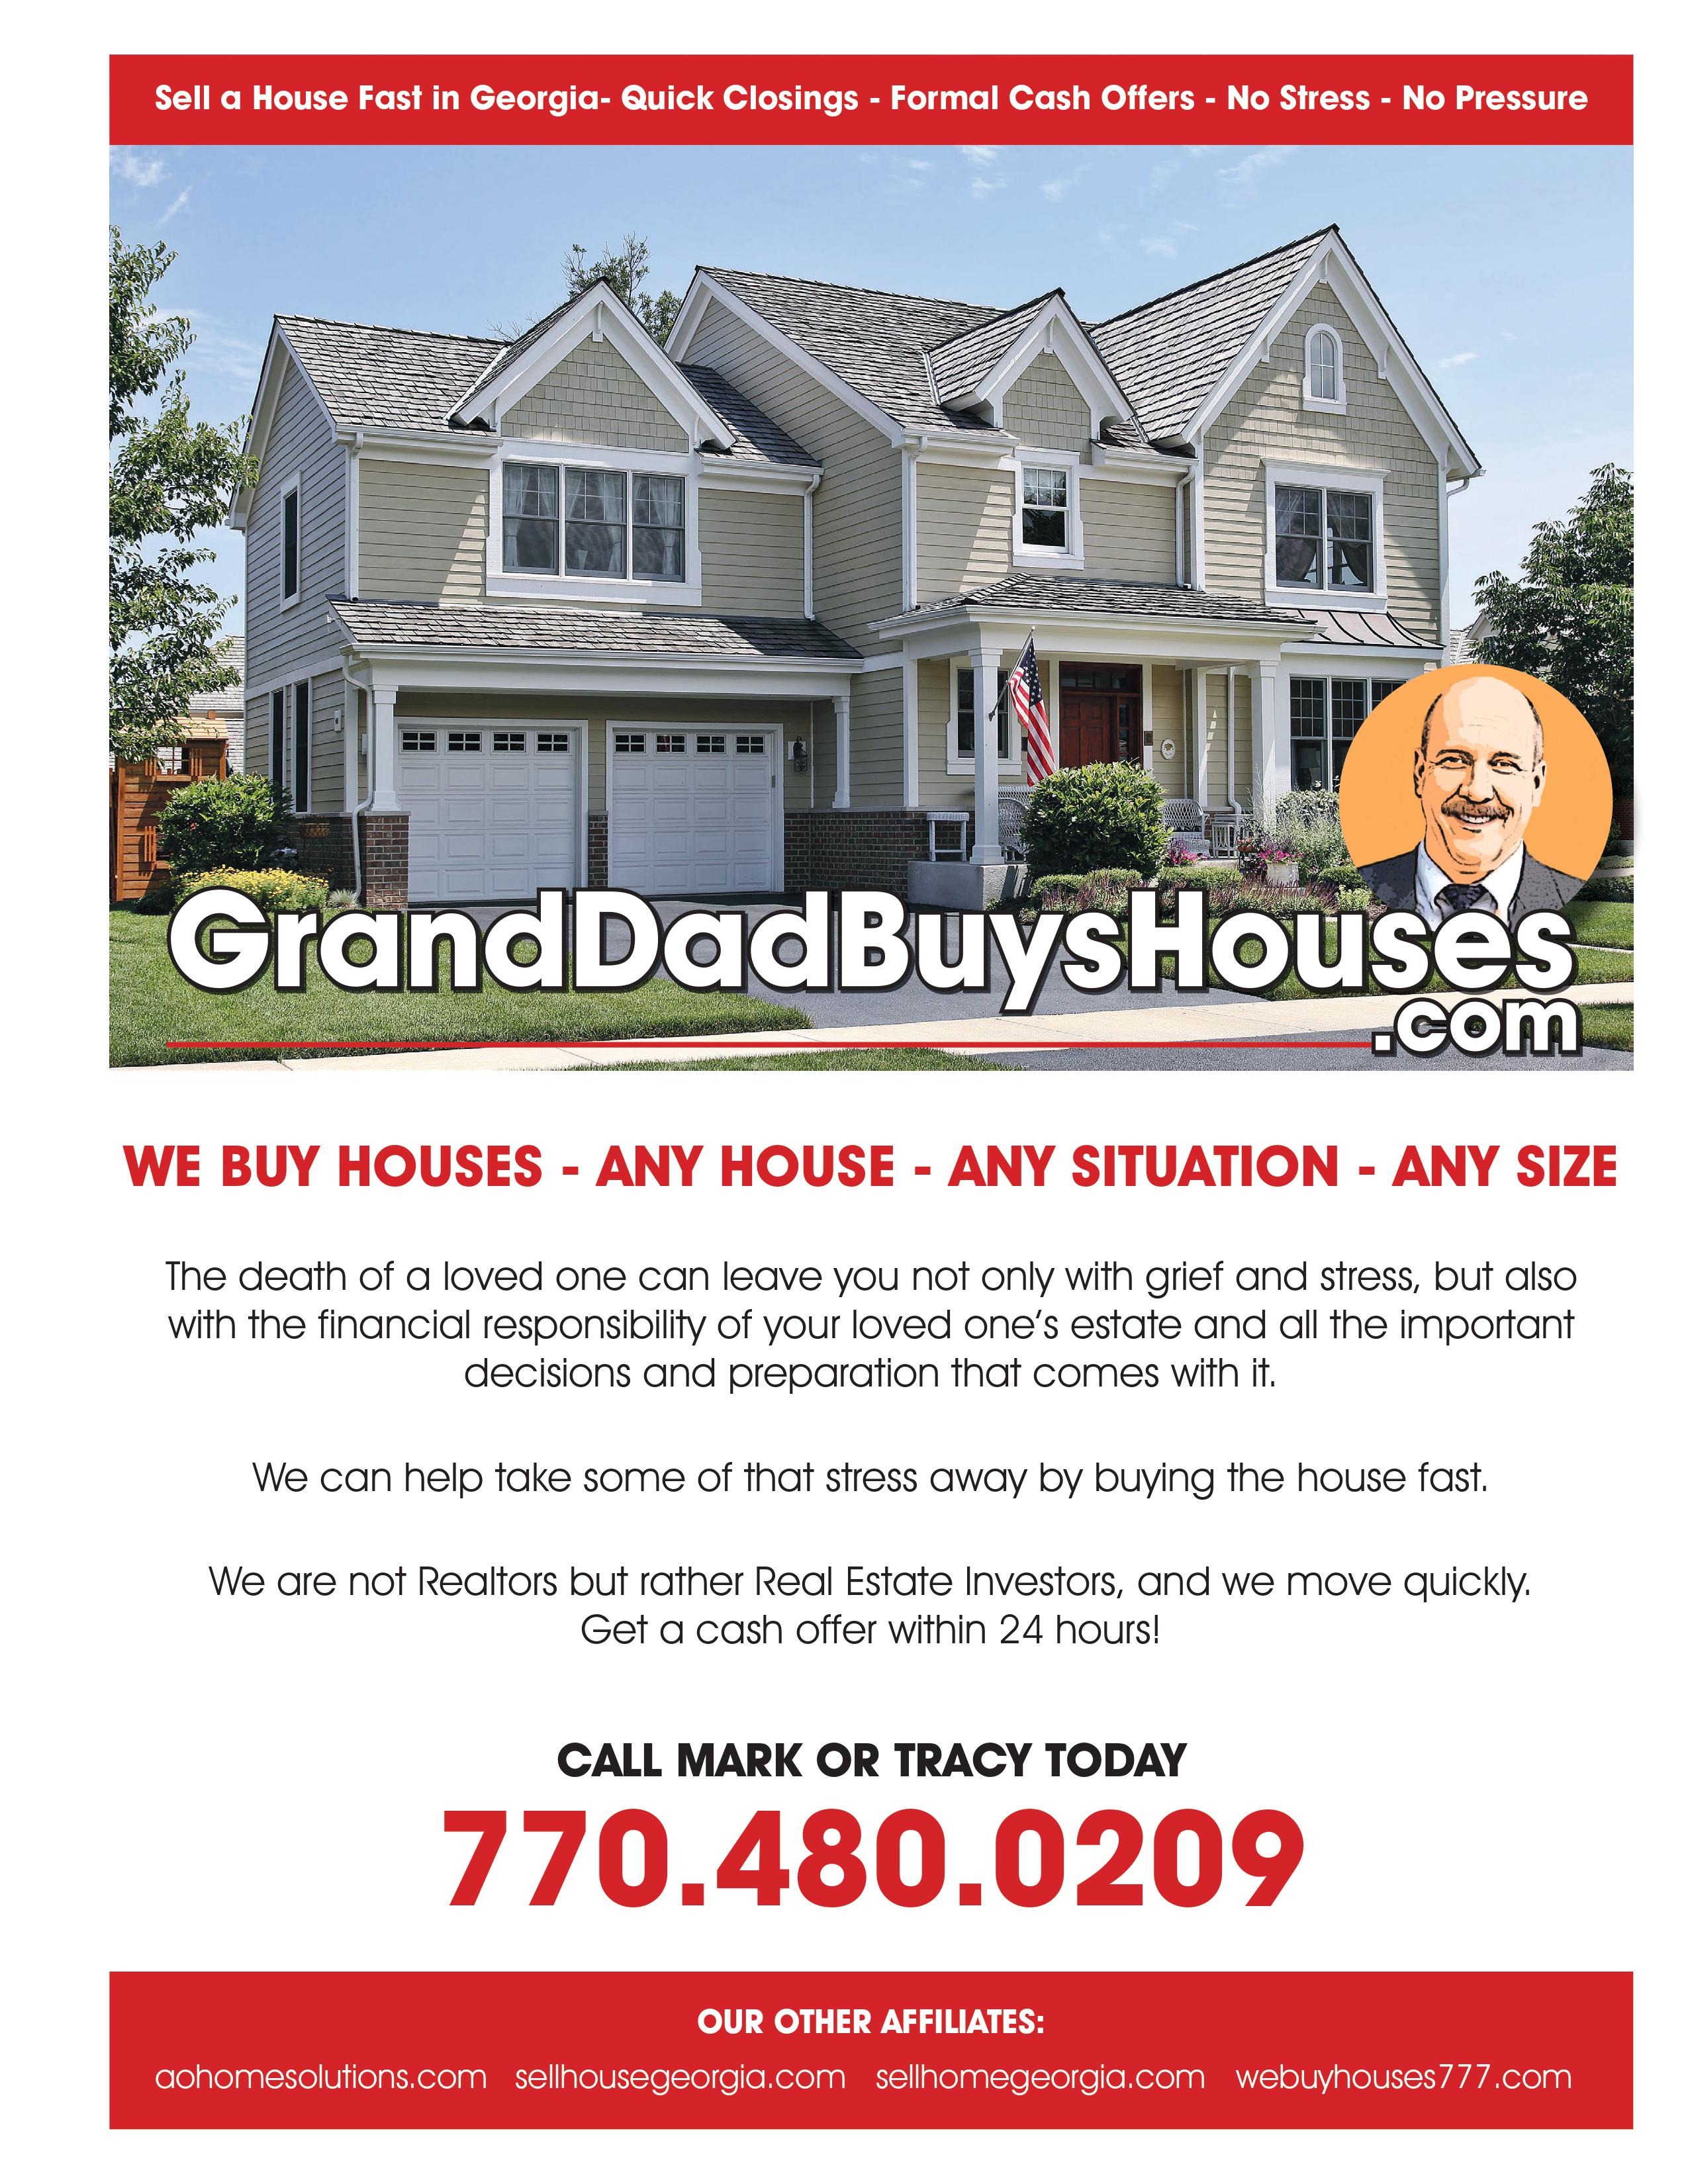 Sell My House Quickly Georgia - The Fast Closing 